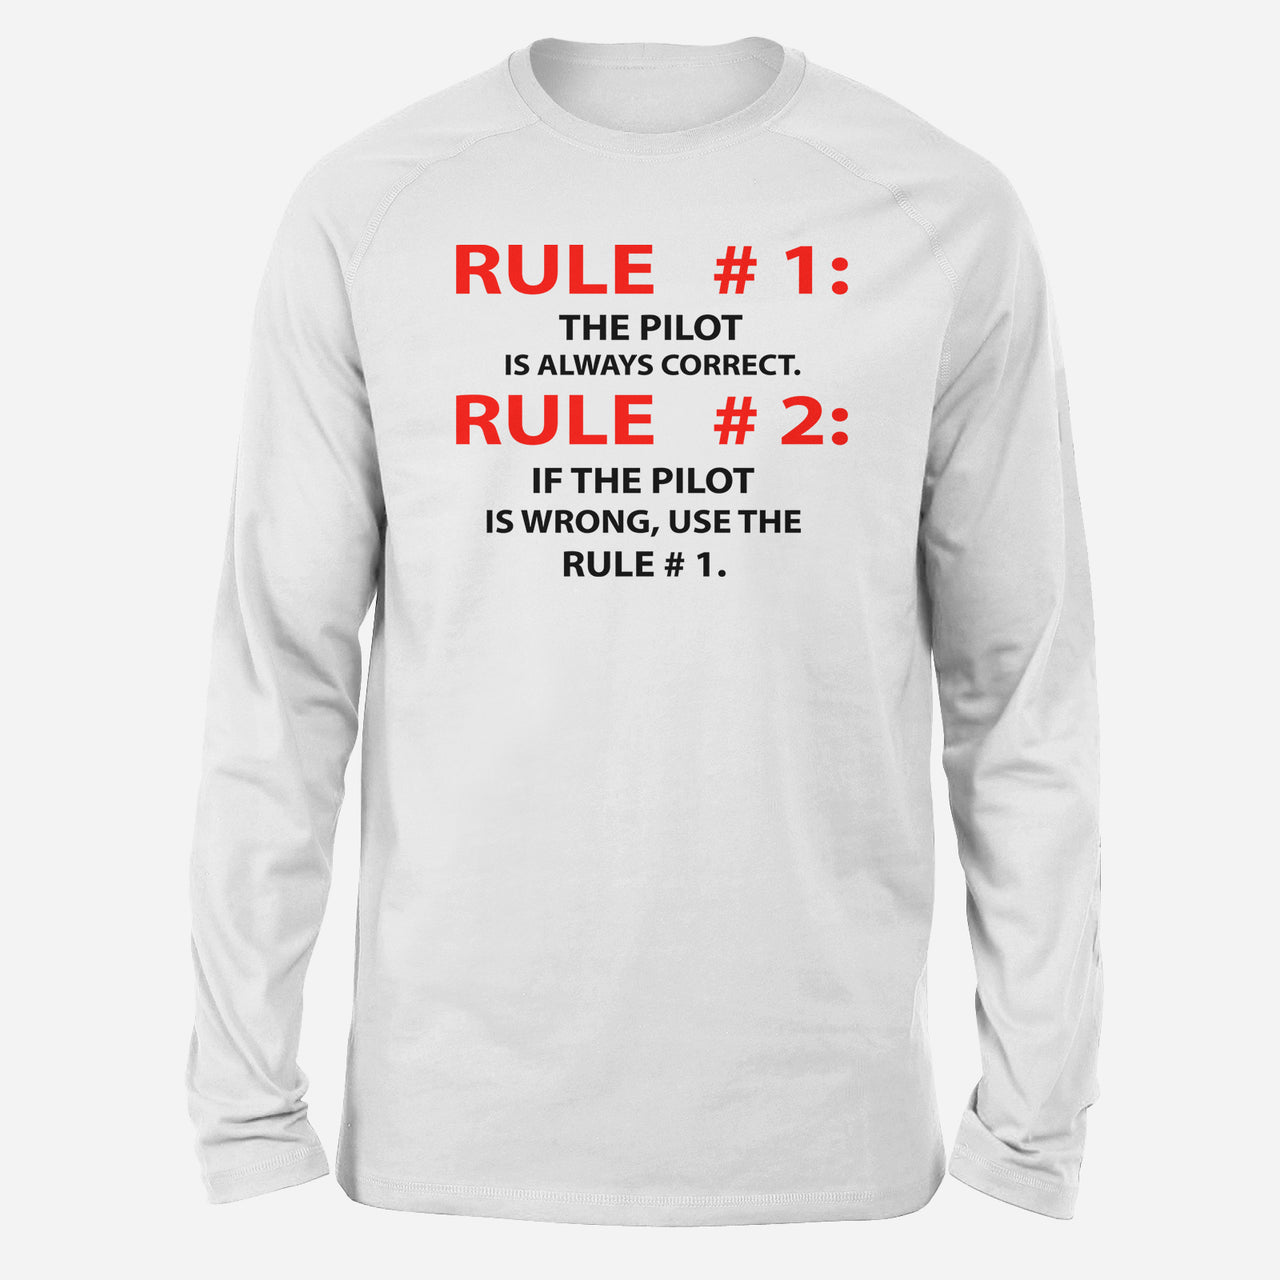 Rule 1 - Pilot is Always Correct Designed Long-Sleeve T-Shirts